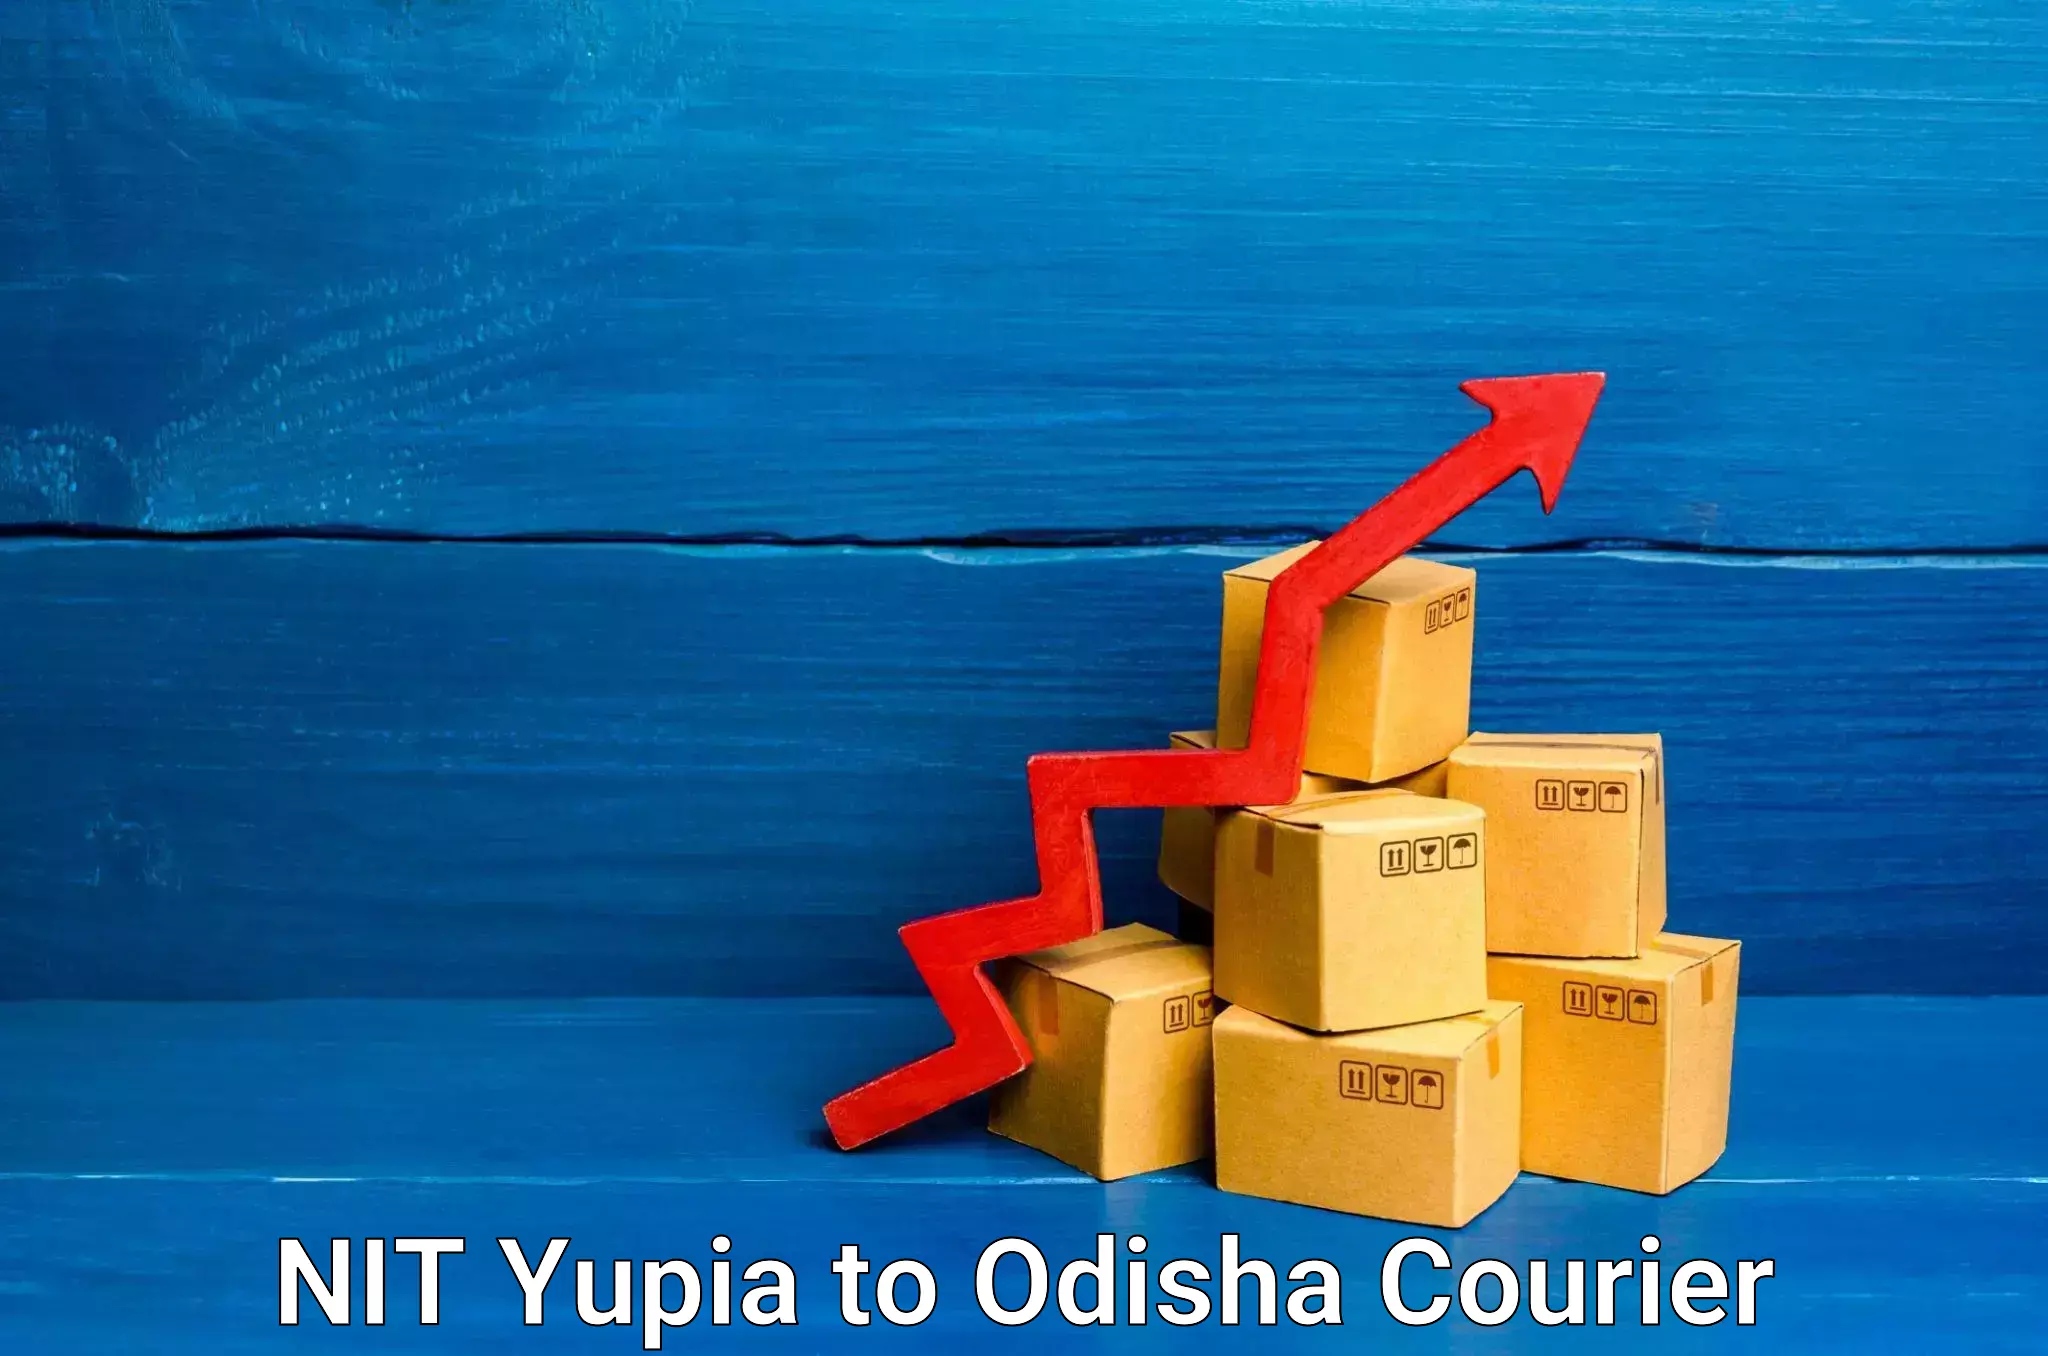 State-of-the-art courier technology NIT Yupia to Balasore